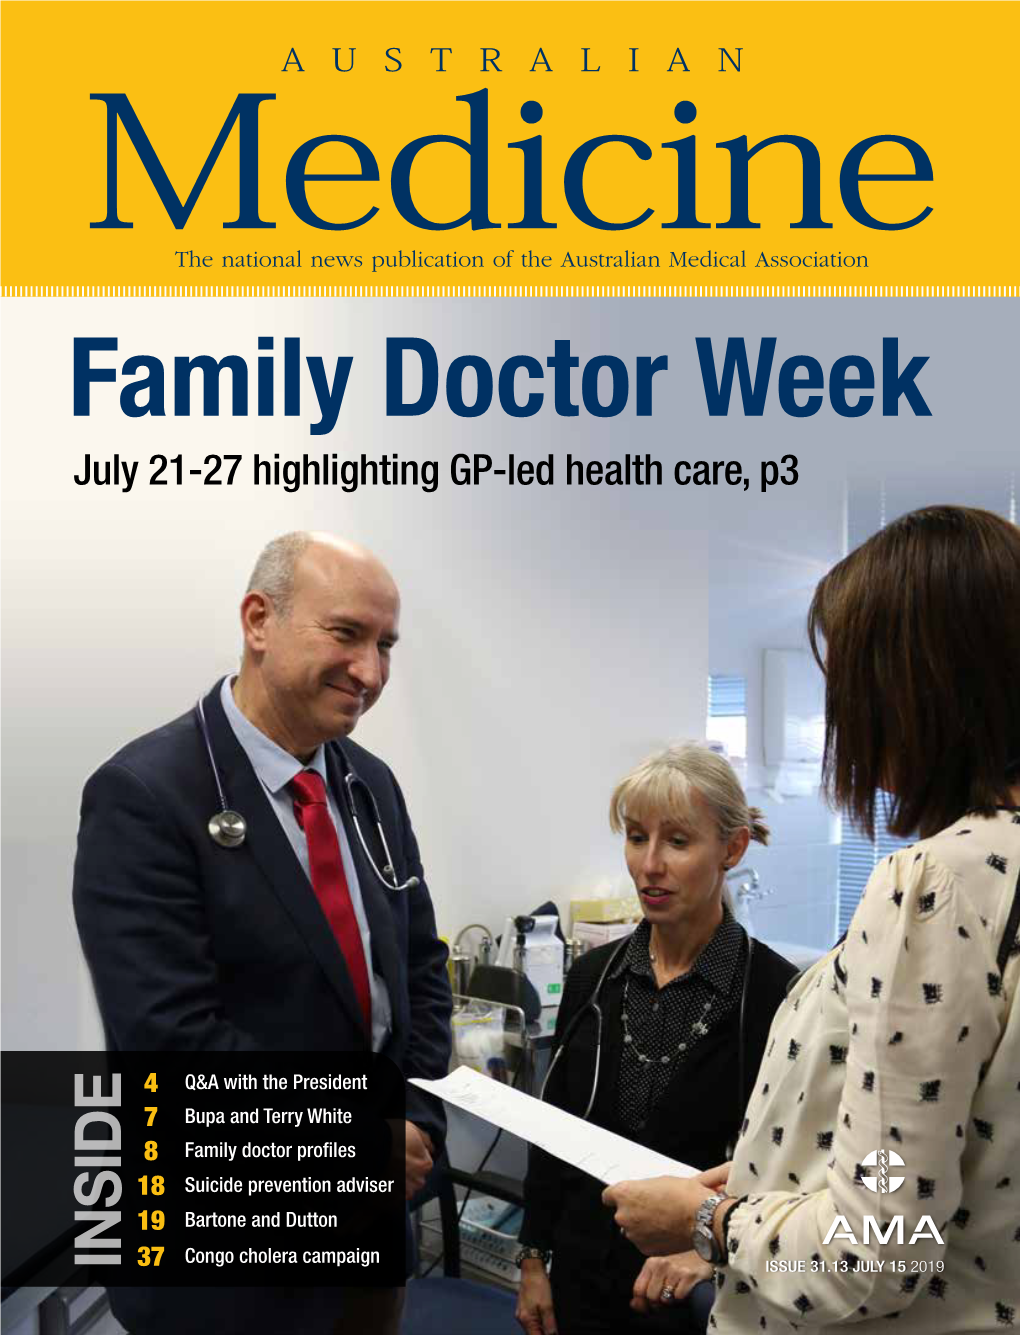 Family Doctor Week July 21-27 Highlighting GP-Led Health Care, P3